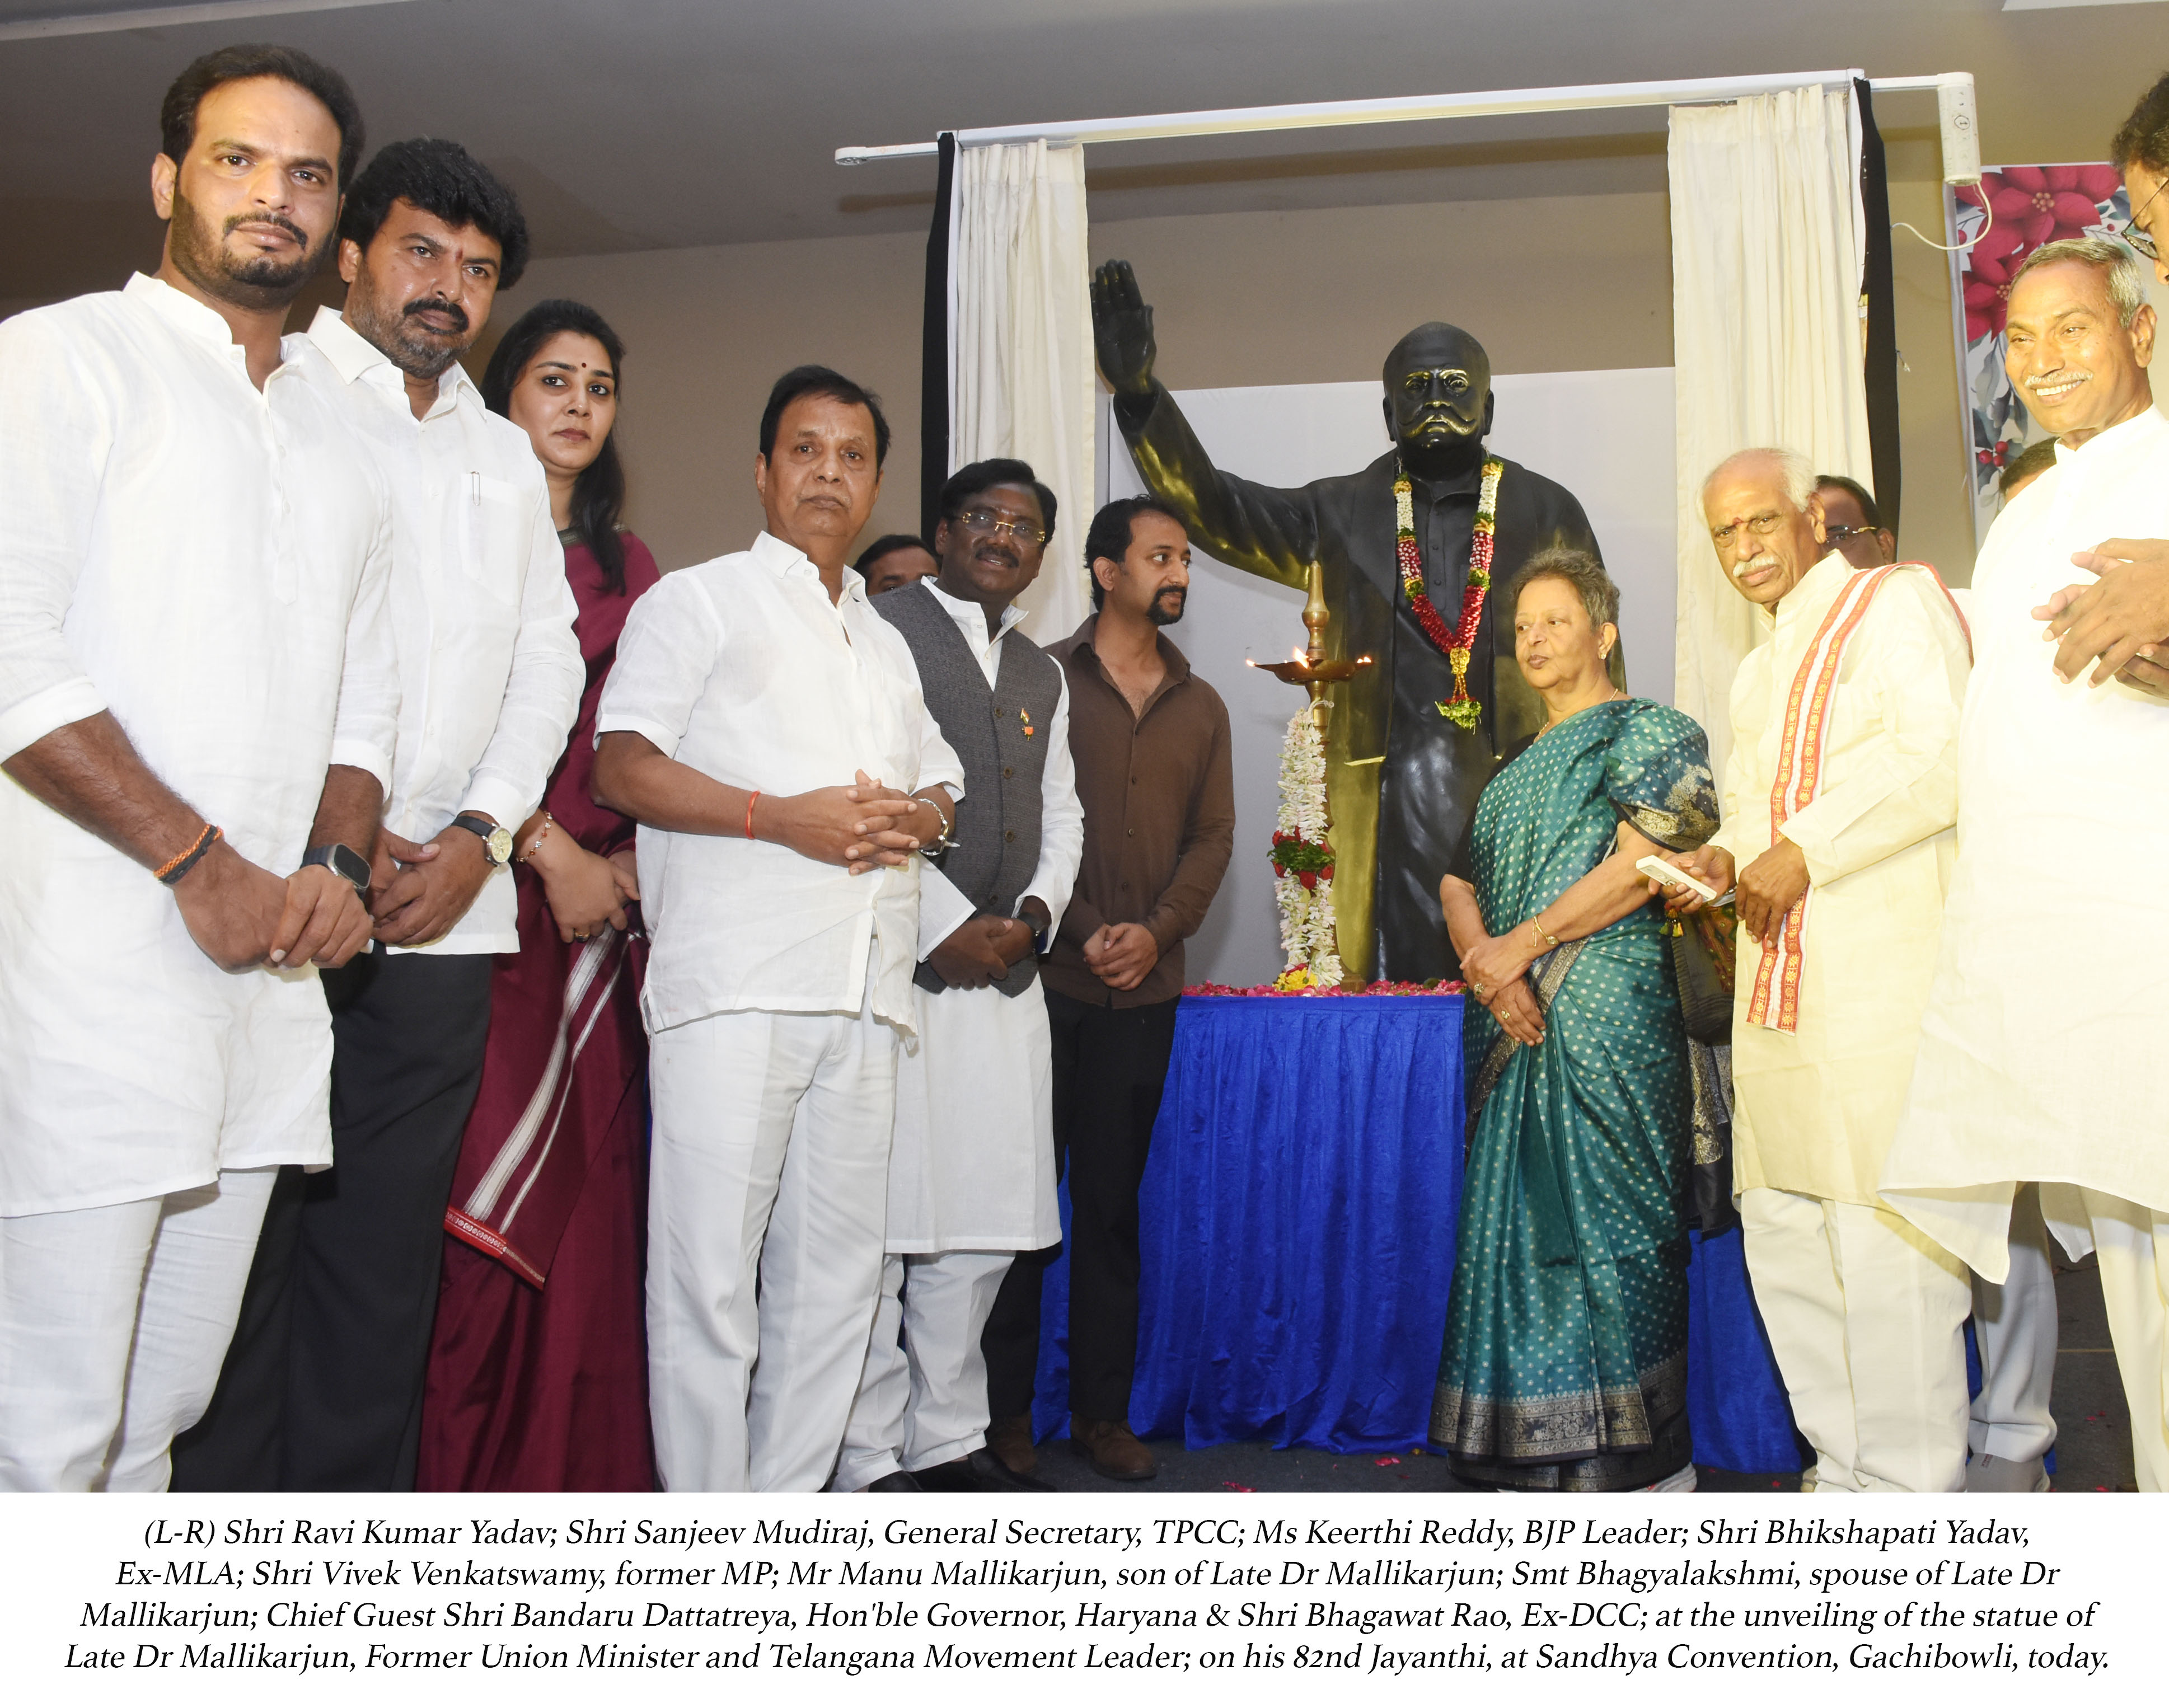 A statue of former Union Minister Late Dr. Mallikarjun, was unveiled at Hyderabad on his 82nd Jayanthi